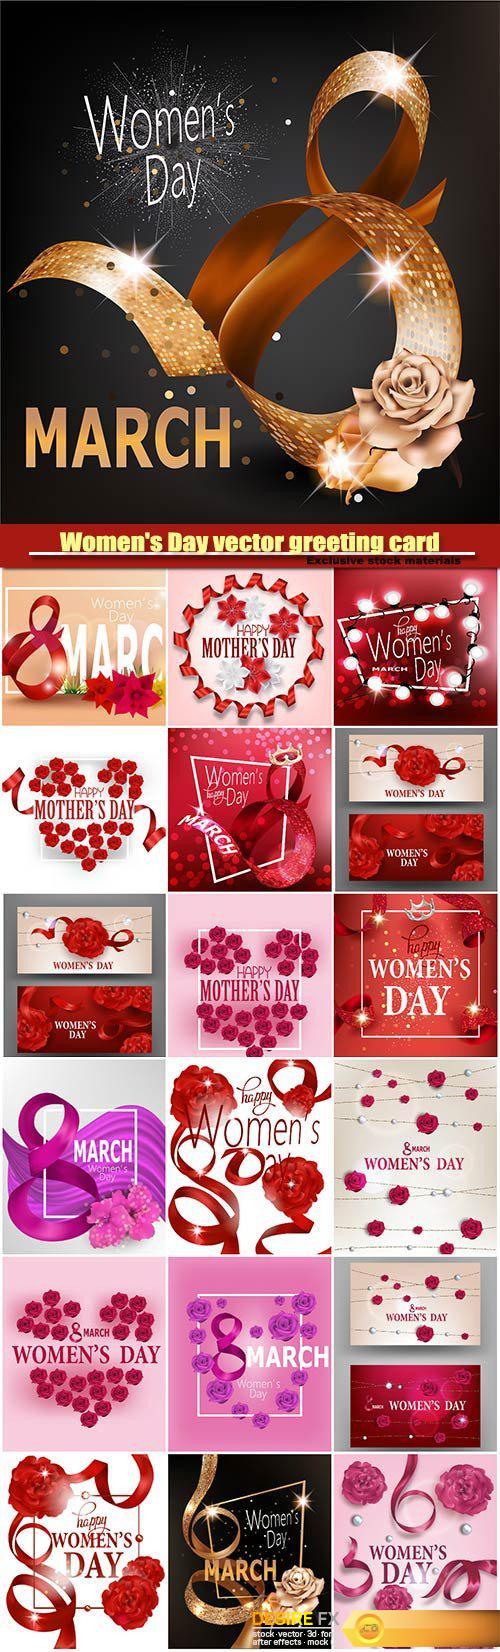 Women's Day vector greeting card with curly red ribbons and red flowers